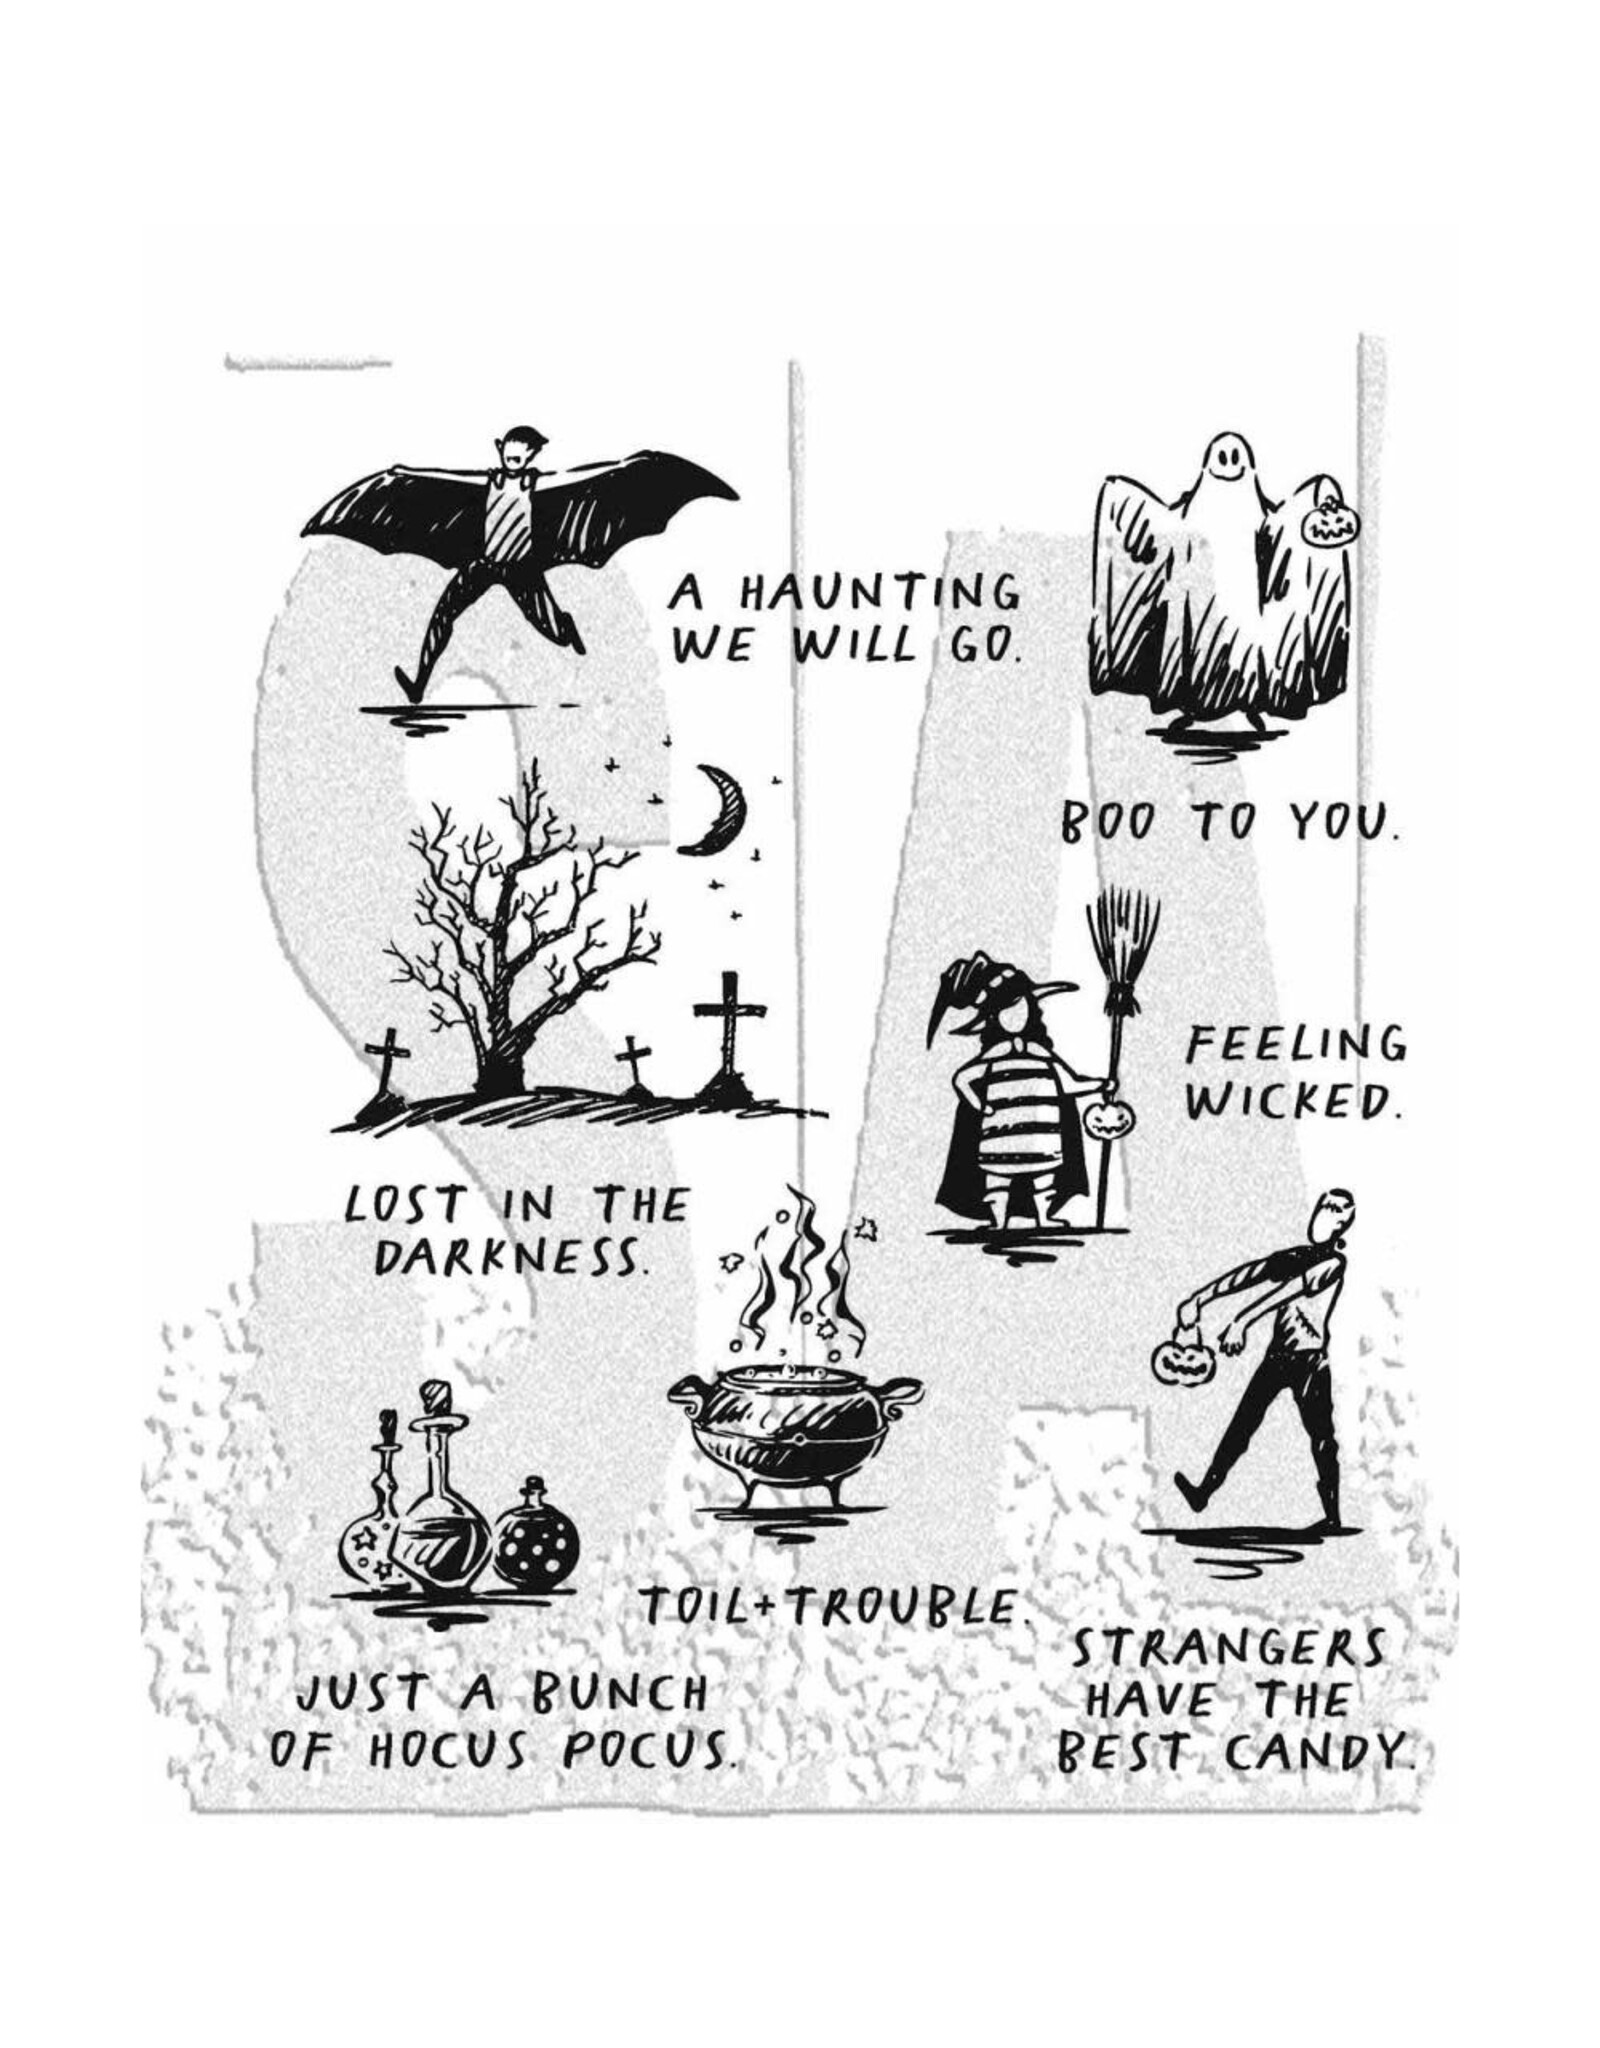 STAMPERS ANONYMOUS STAMPERS ANONYMOUS TIM HOLTZ HALLOWEEN SKETCHBOOK 7x8.5 CLING STAMP SET